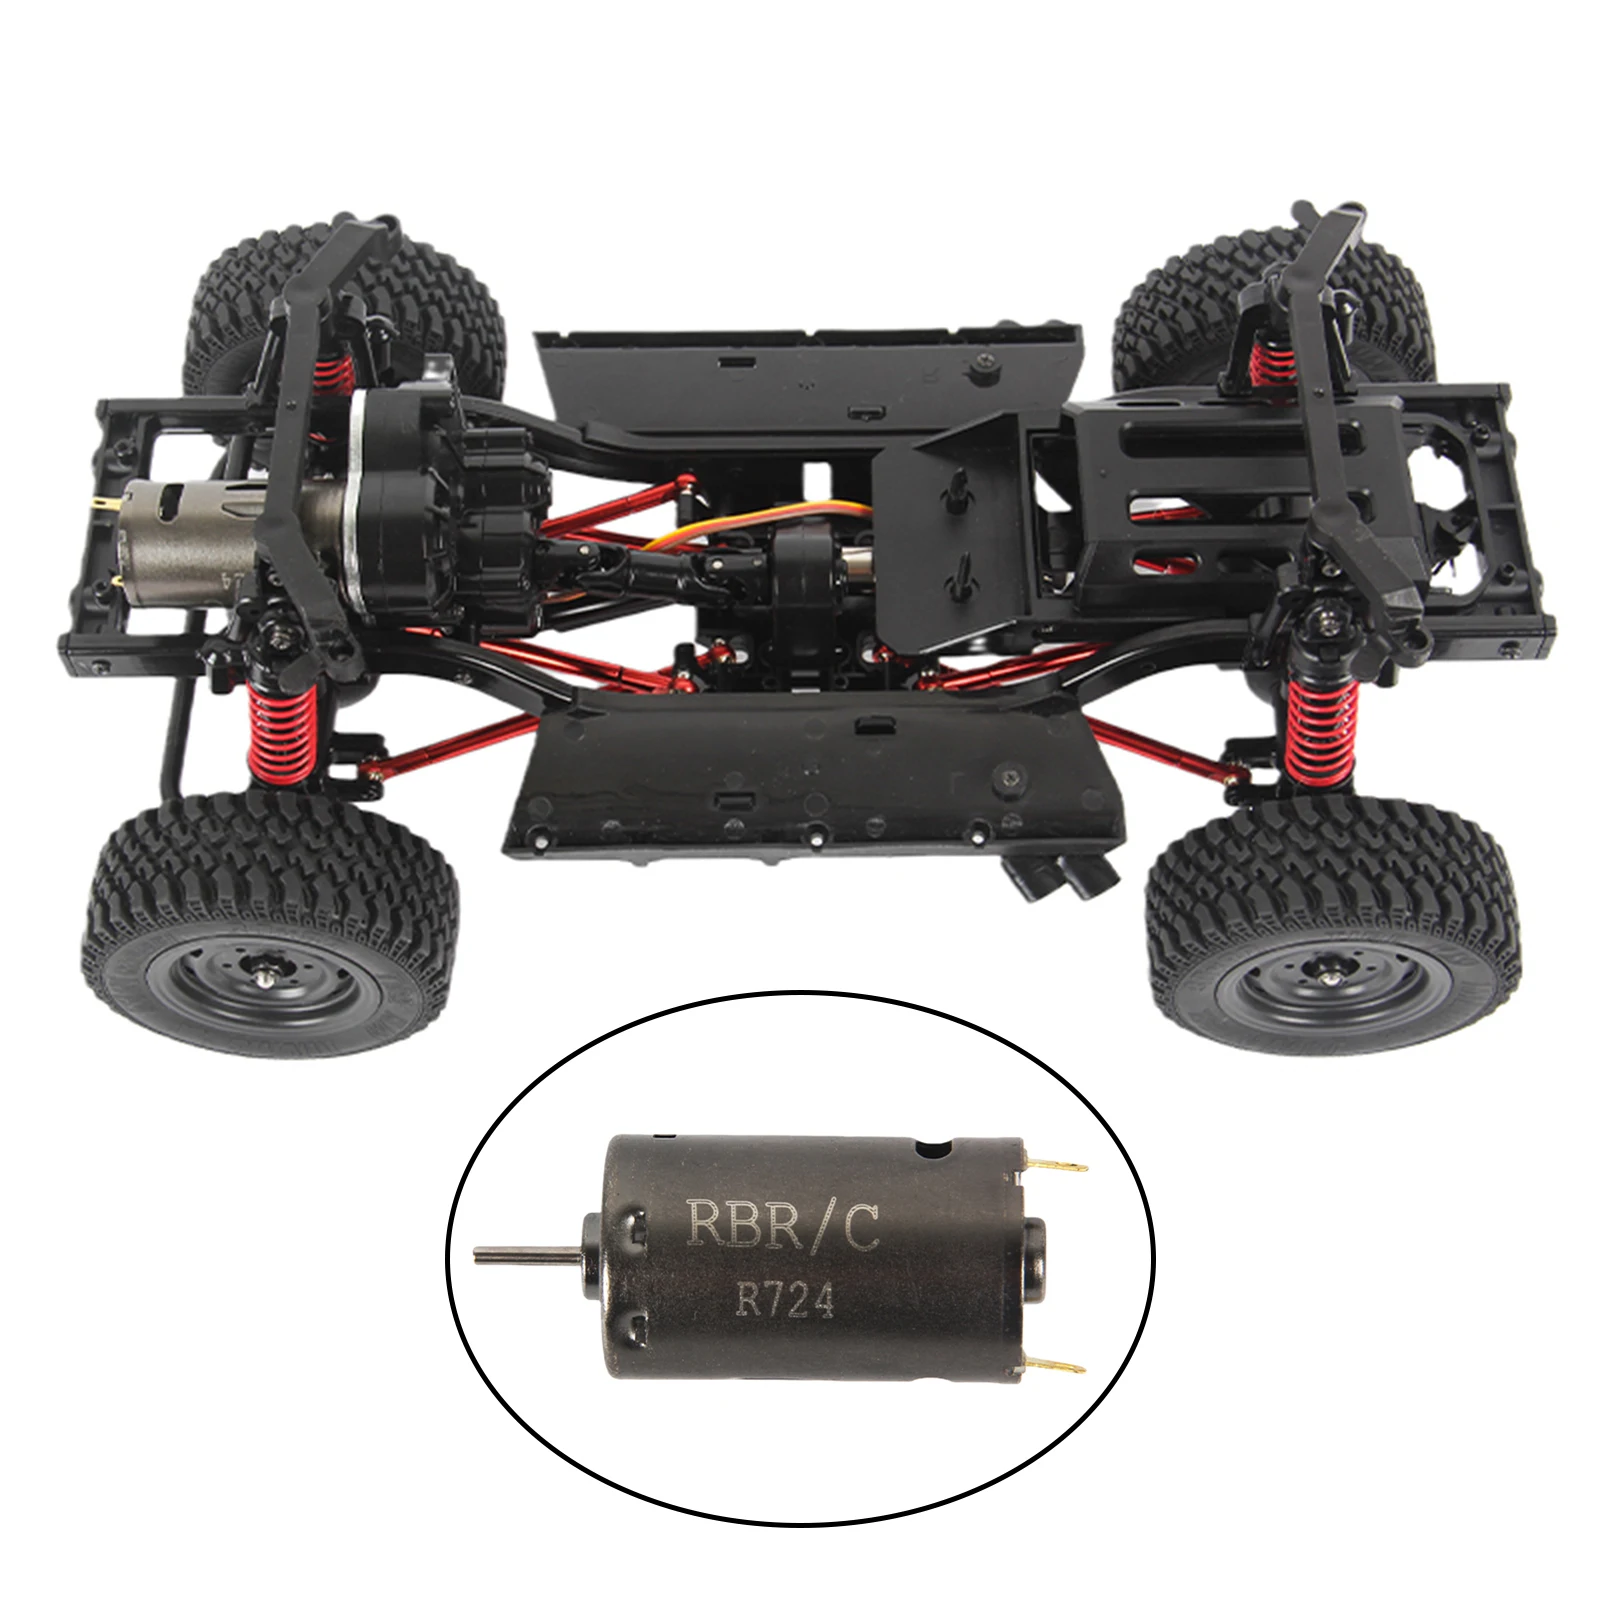 RC Metal High Speed 390 Motor for MN86 1/12 Scale Off-Road Vehicles Model Crawler Car Buggy Trucks DIY Accessory